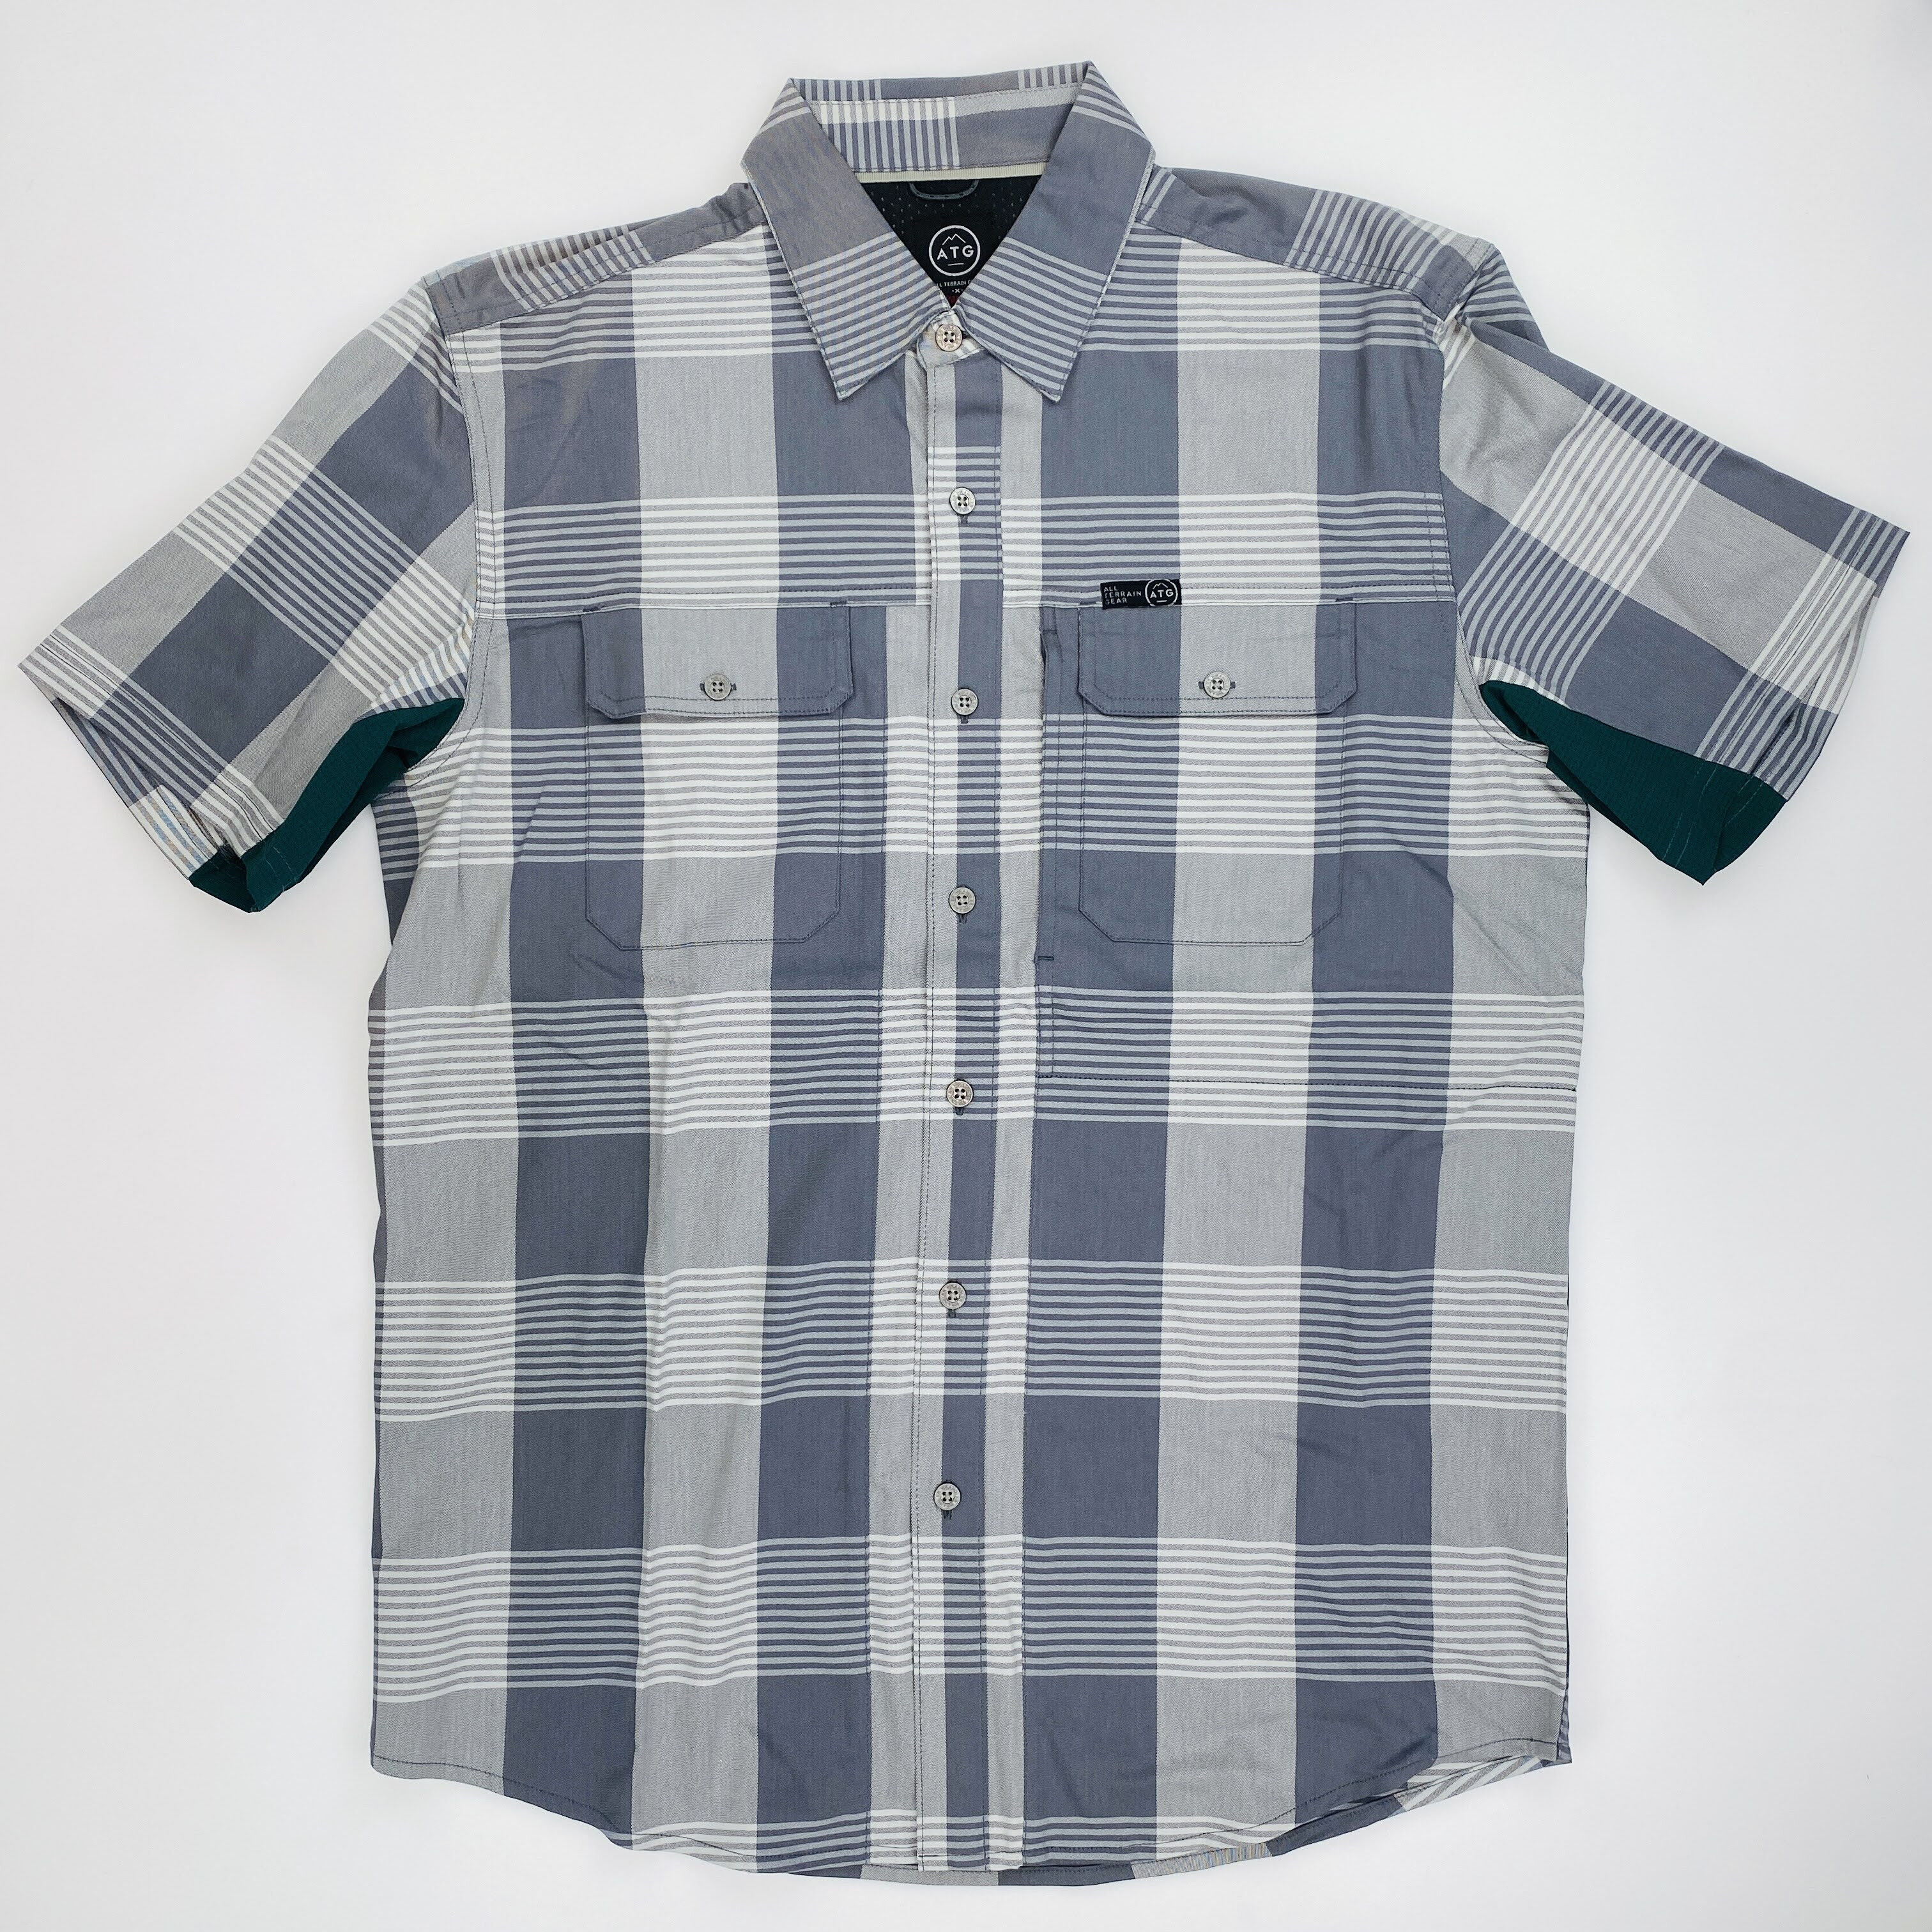 Wrangler Ss Mix Material Shirt - Seconde main Chemise homme - Gris - M | Hardloop